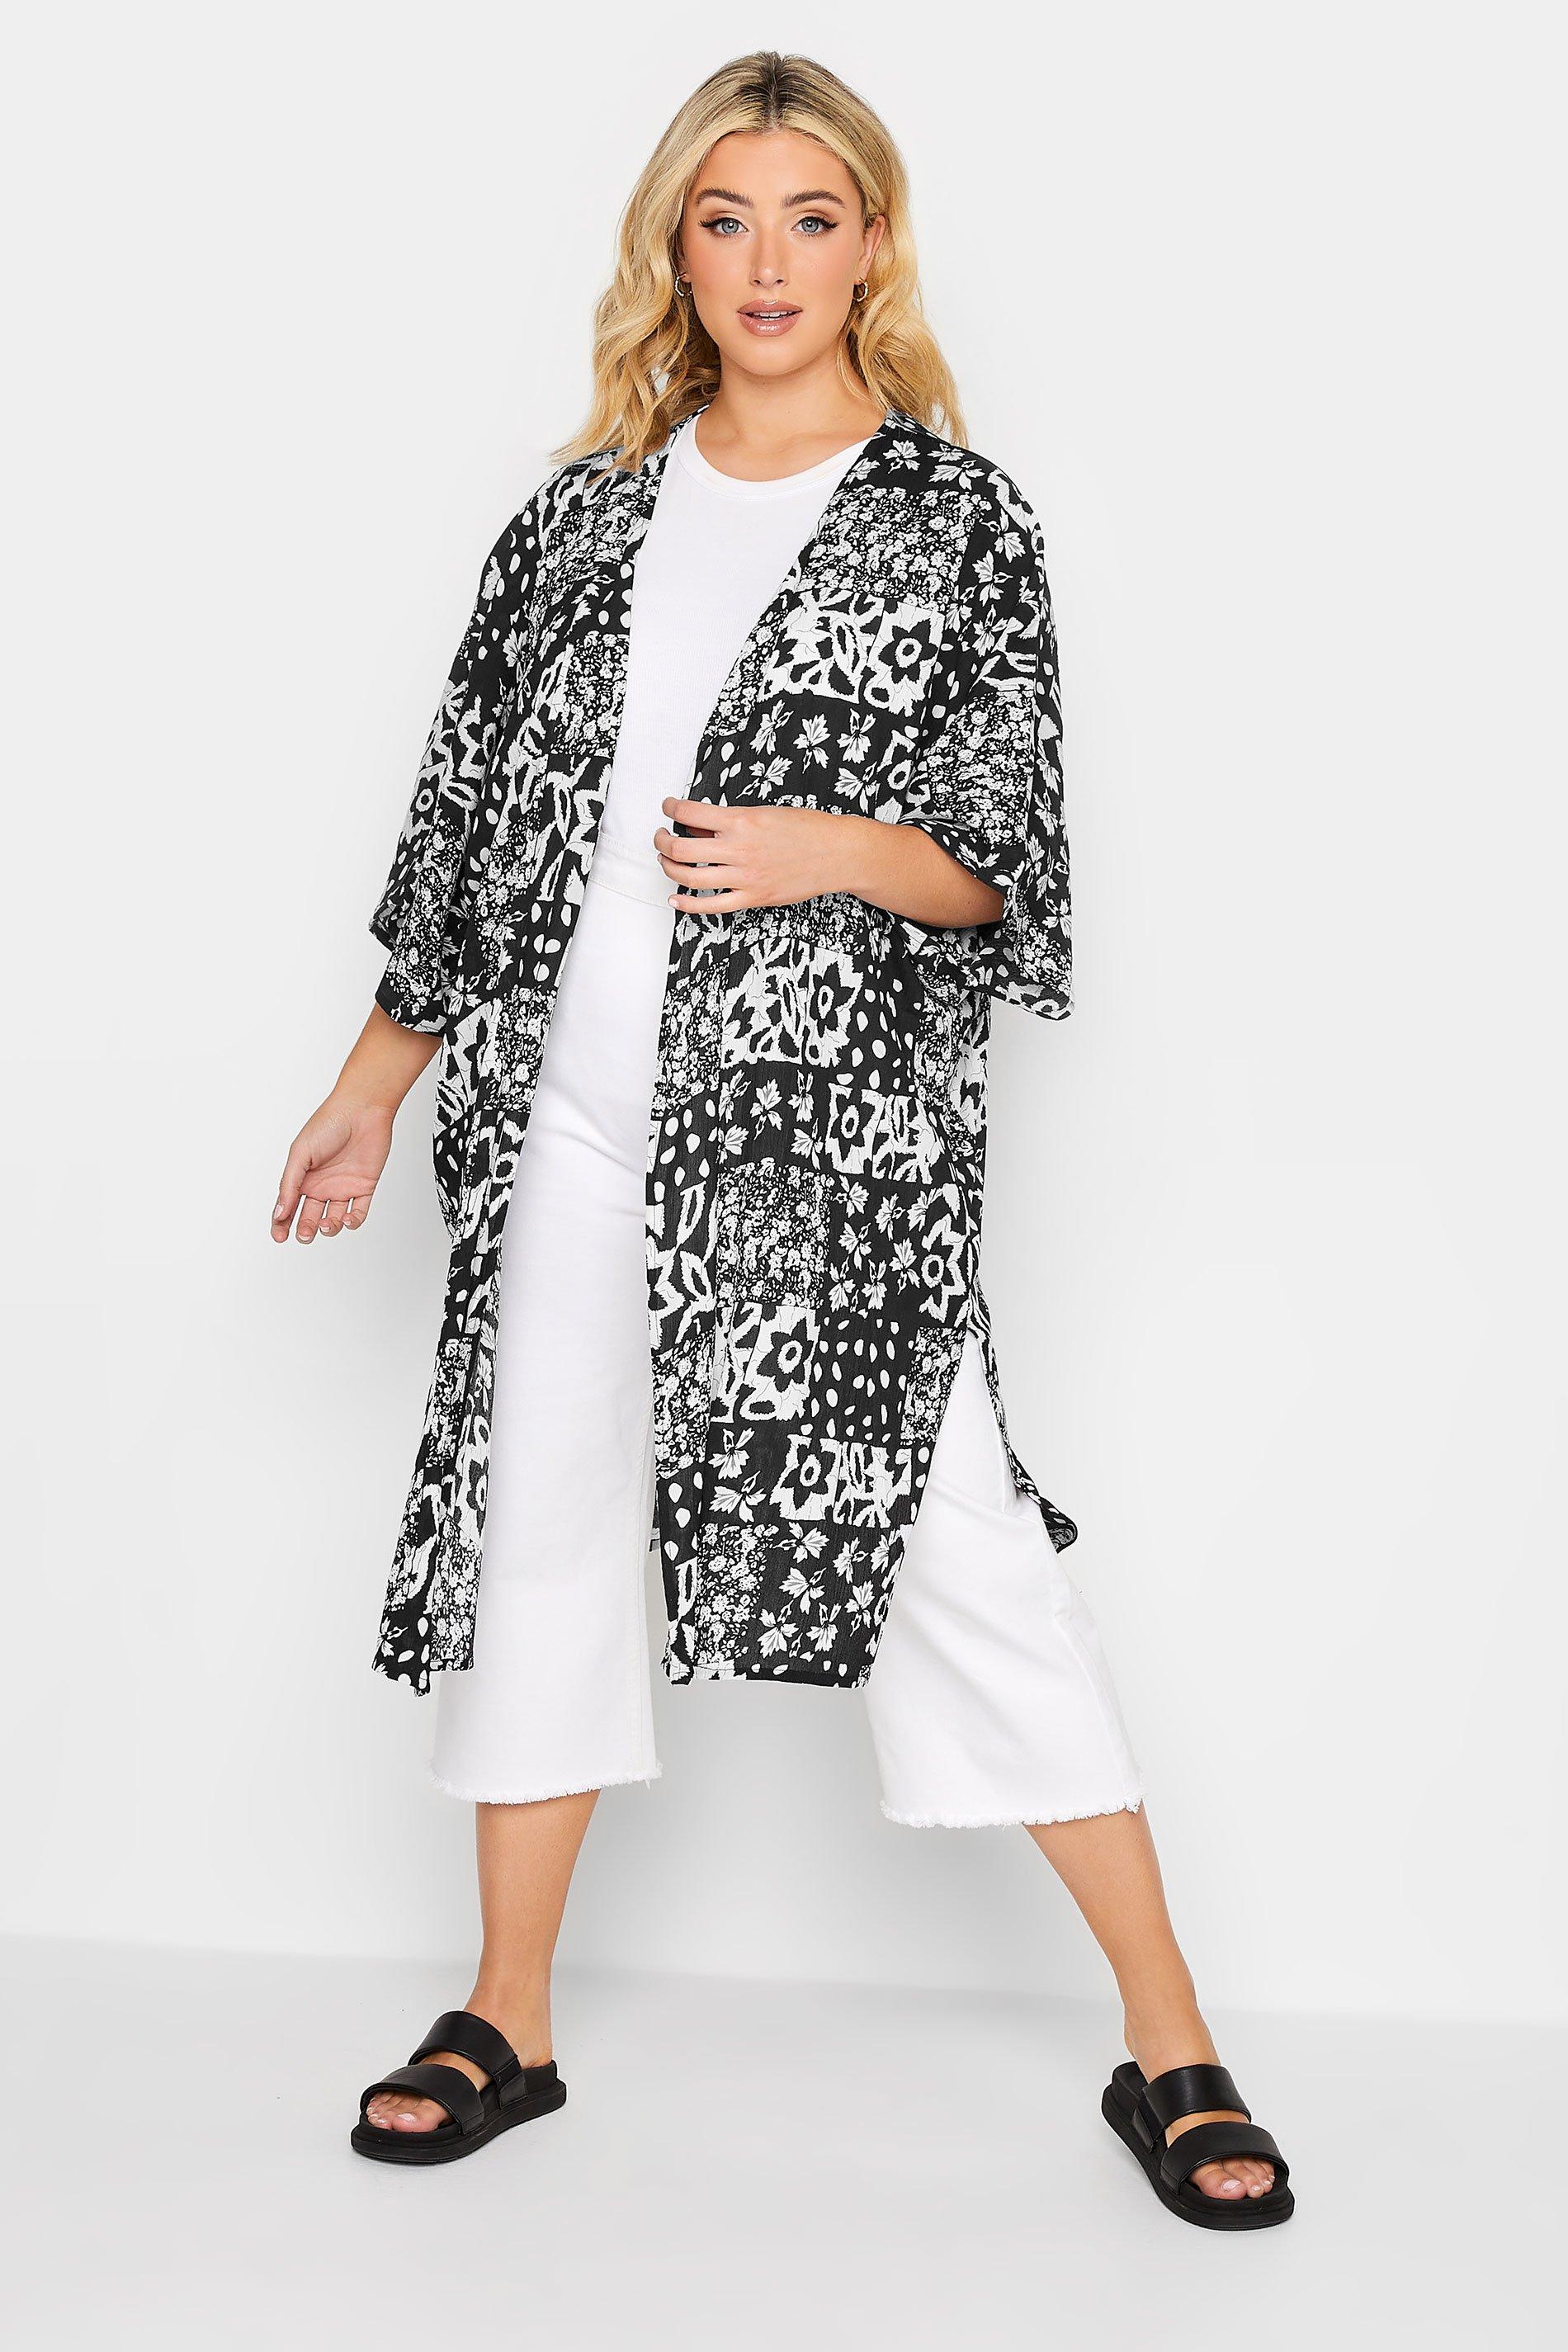 Longline Tropical Print Cover Up